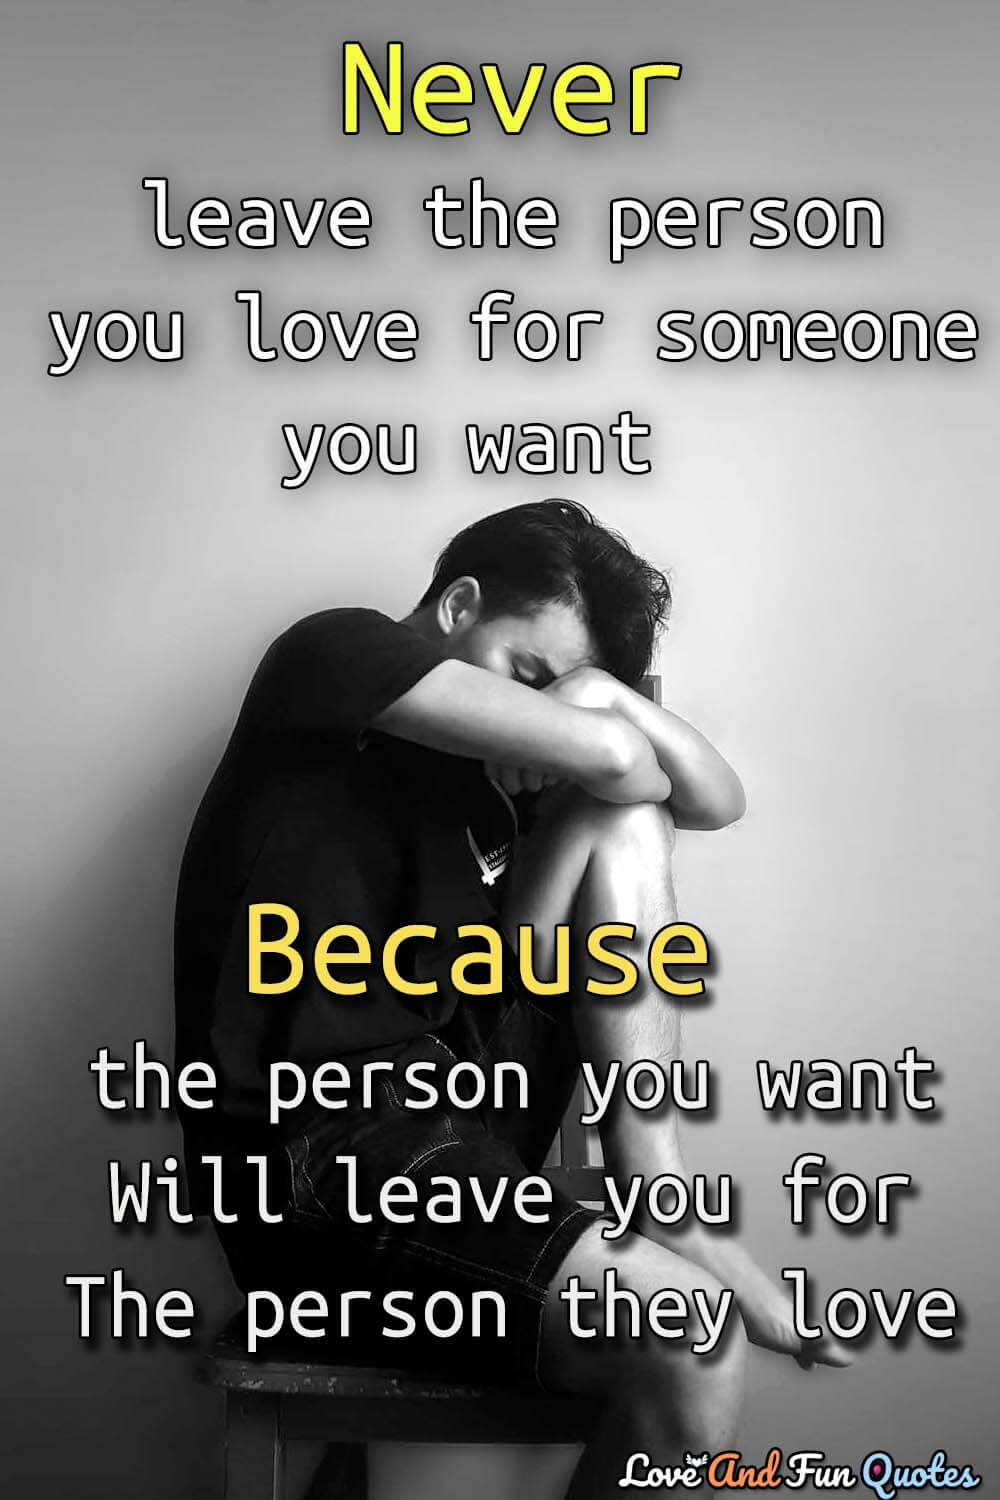 Never leave the person you love for someone you want because the person you want will leave you for the person they love-Anonymous